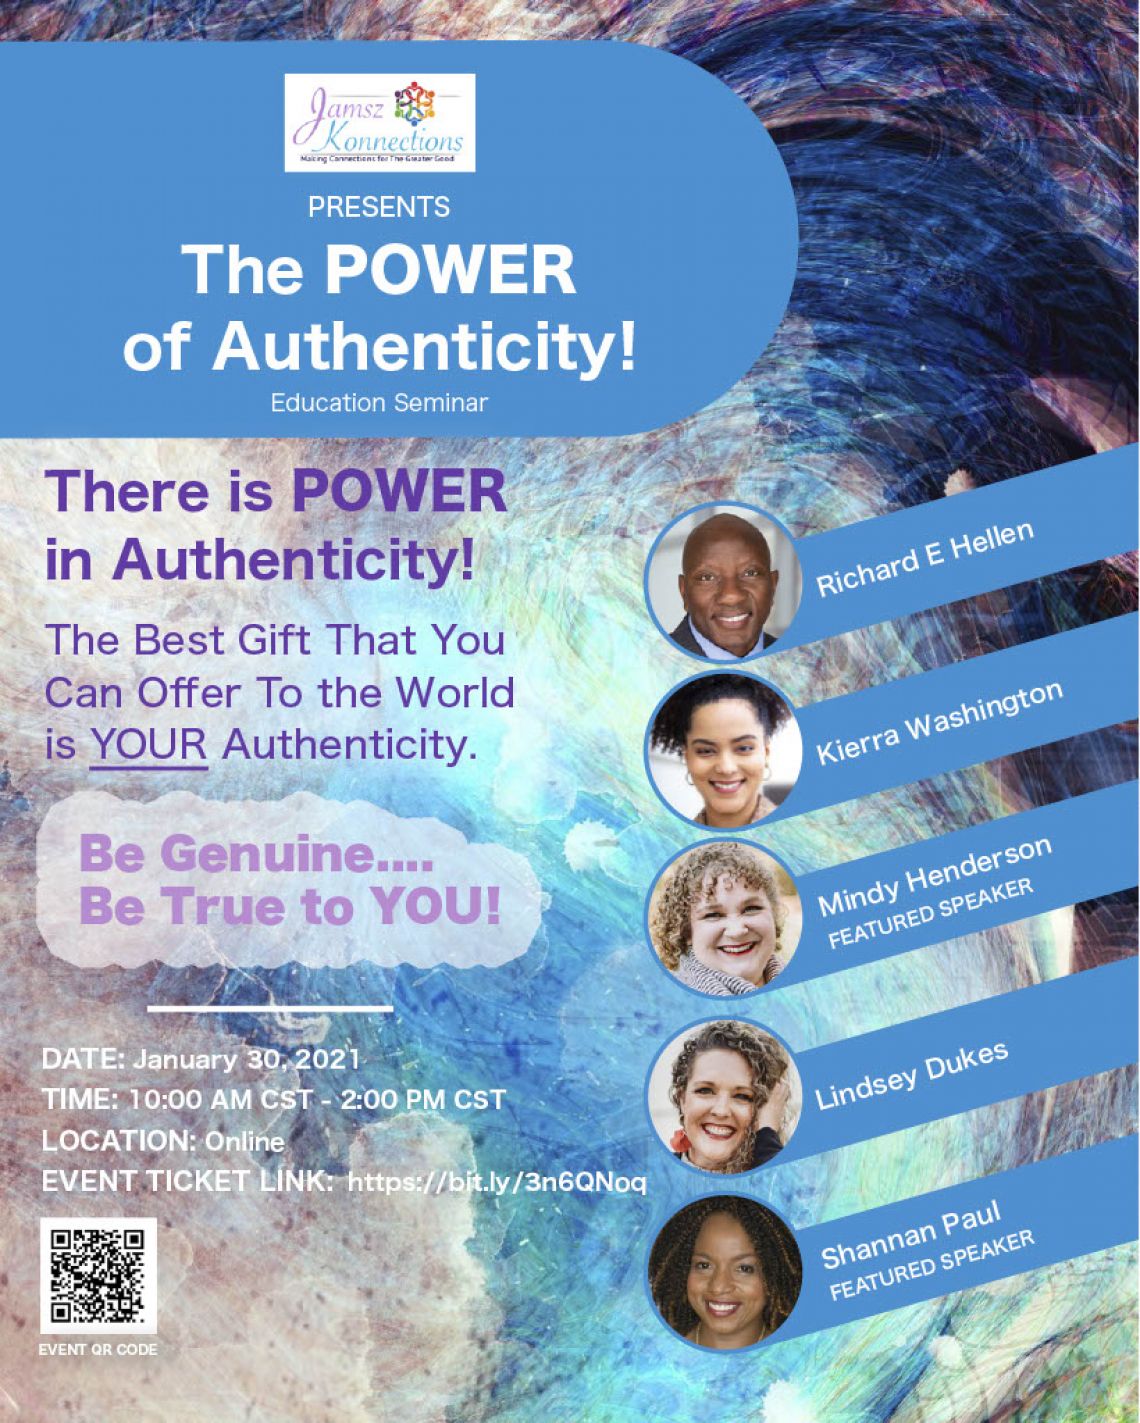 The POWER of Authenticity